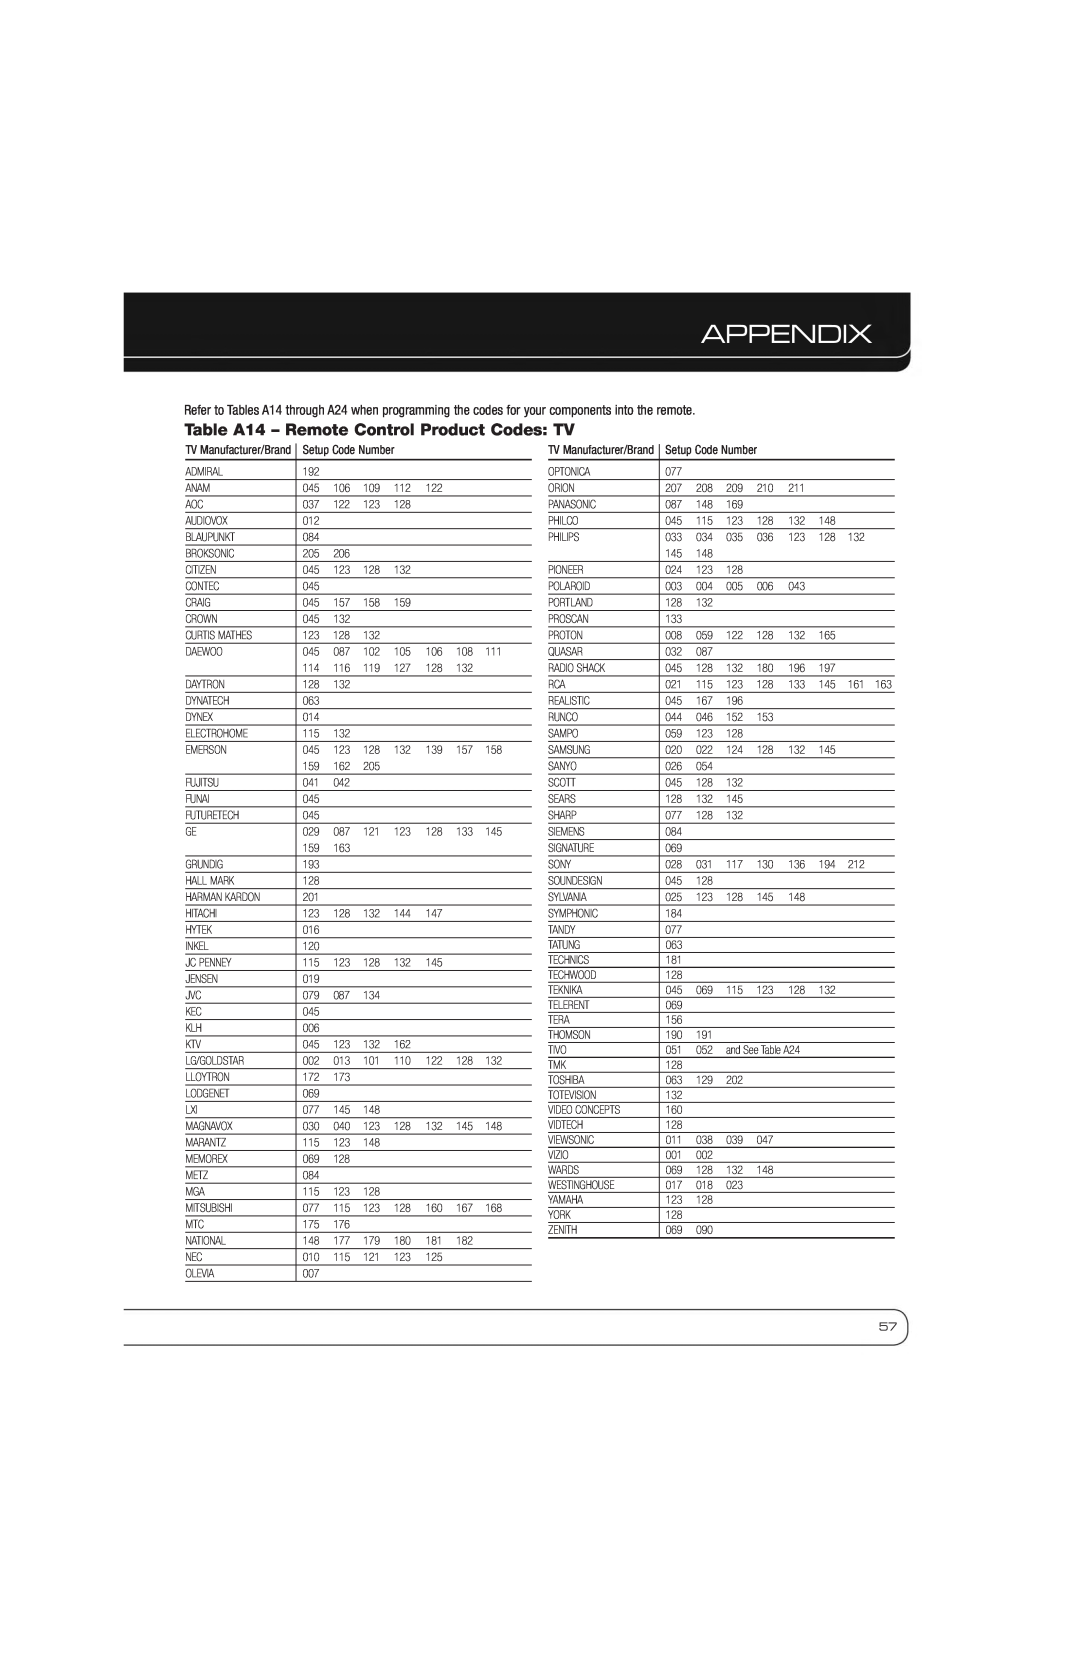 Harman AVR 2600 owner manual Table A14 - Remote Control Product Codes TV, Appendix 